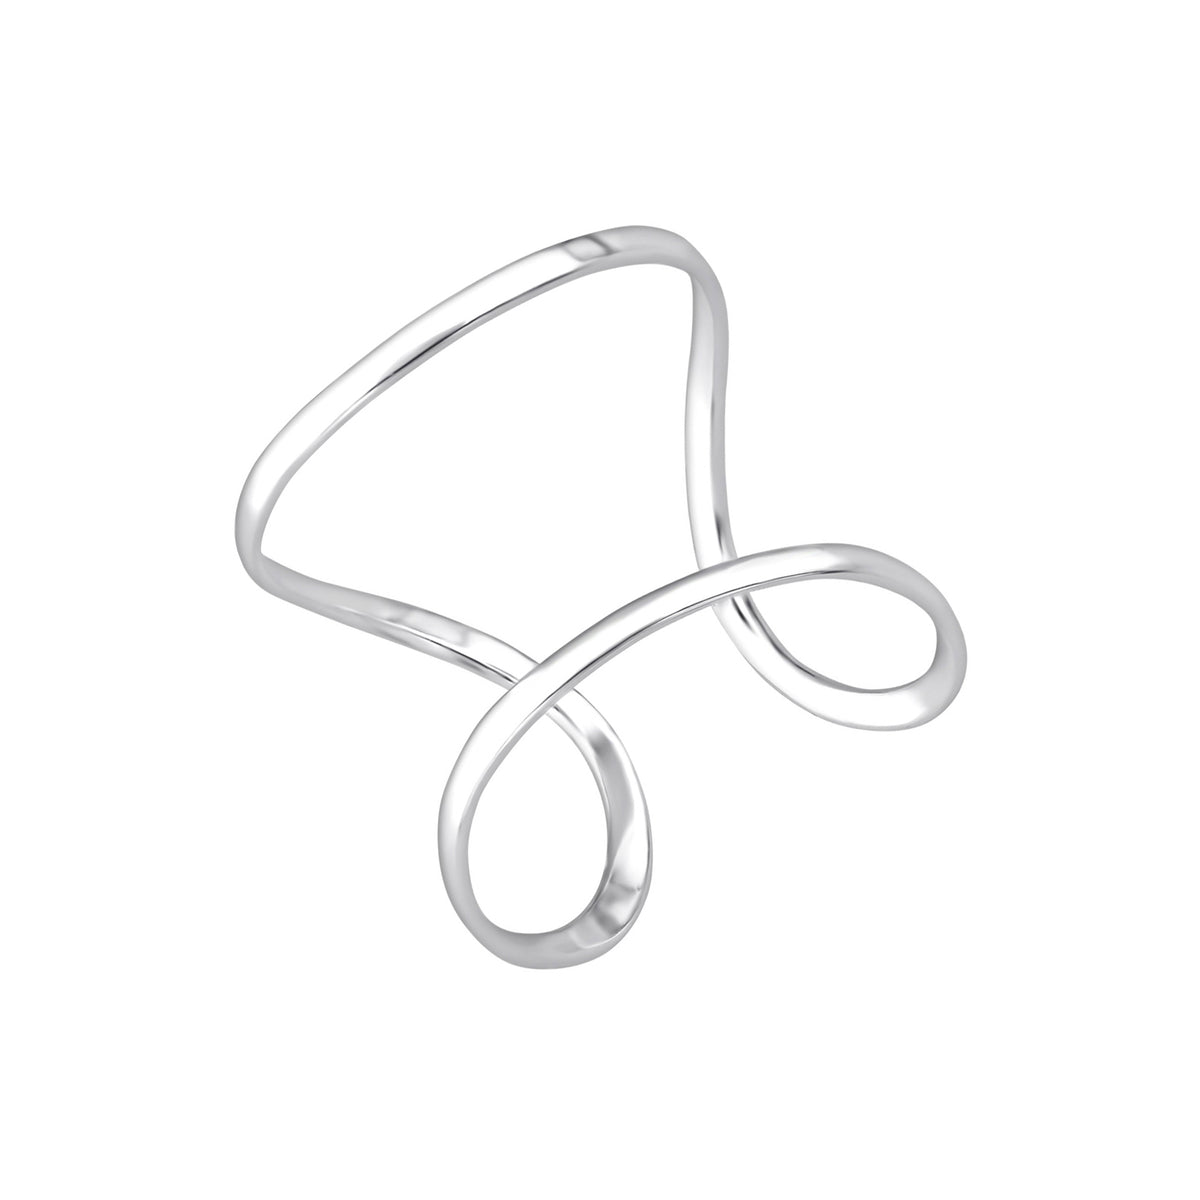 INEL ARGINT 925 SUMMER TIME rings > silver ring > summer time ring > gifts for her > gifts for girls > gifts for moms > gifts for best friend > birthday gift > minimalist ring Maison la Stephanie   